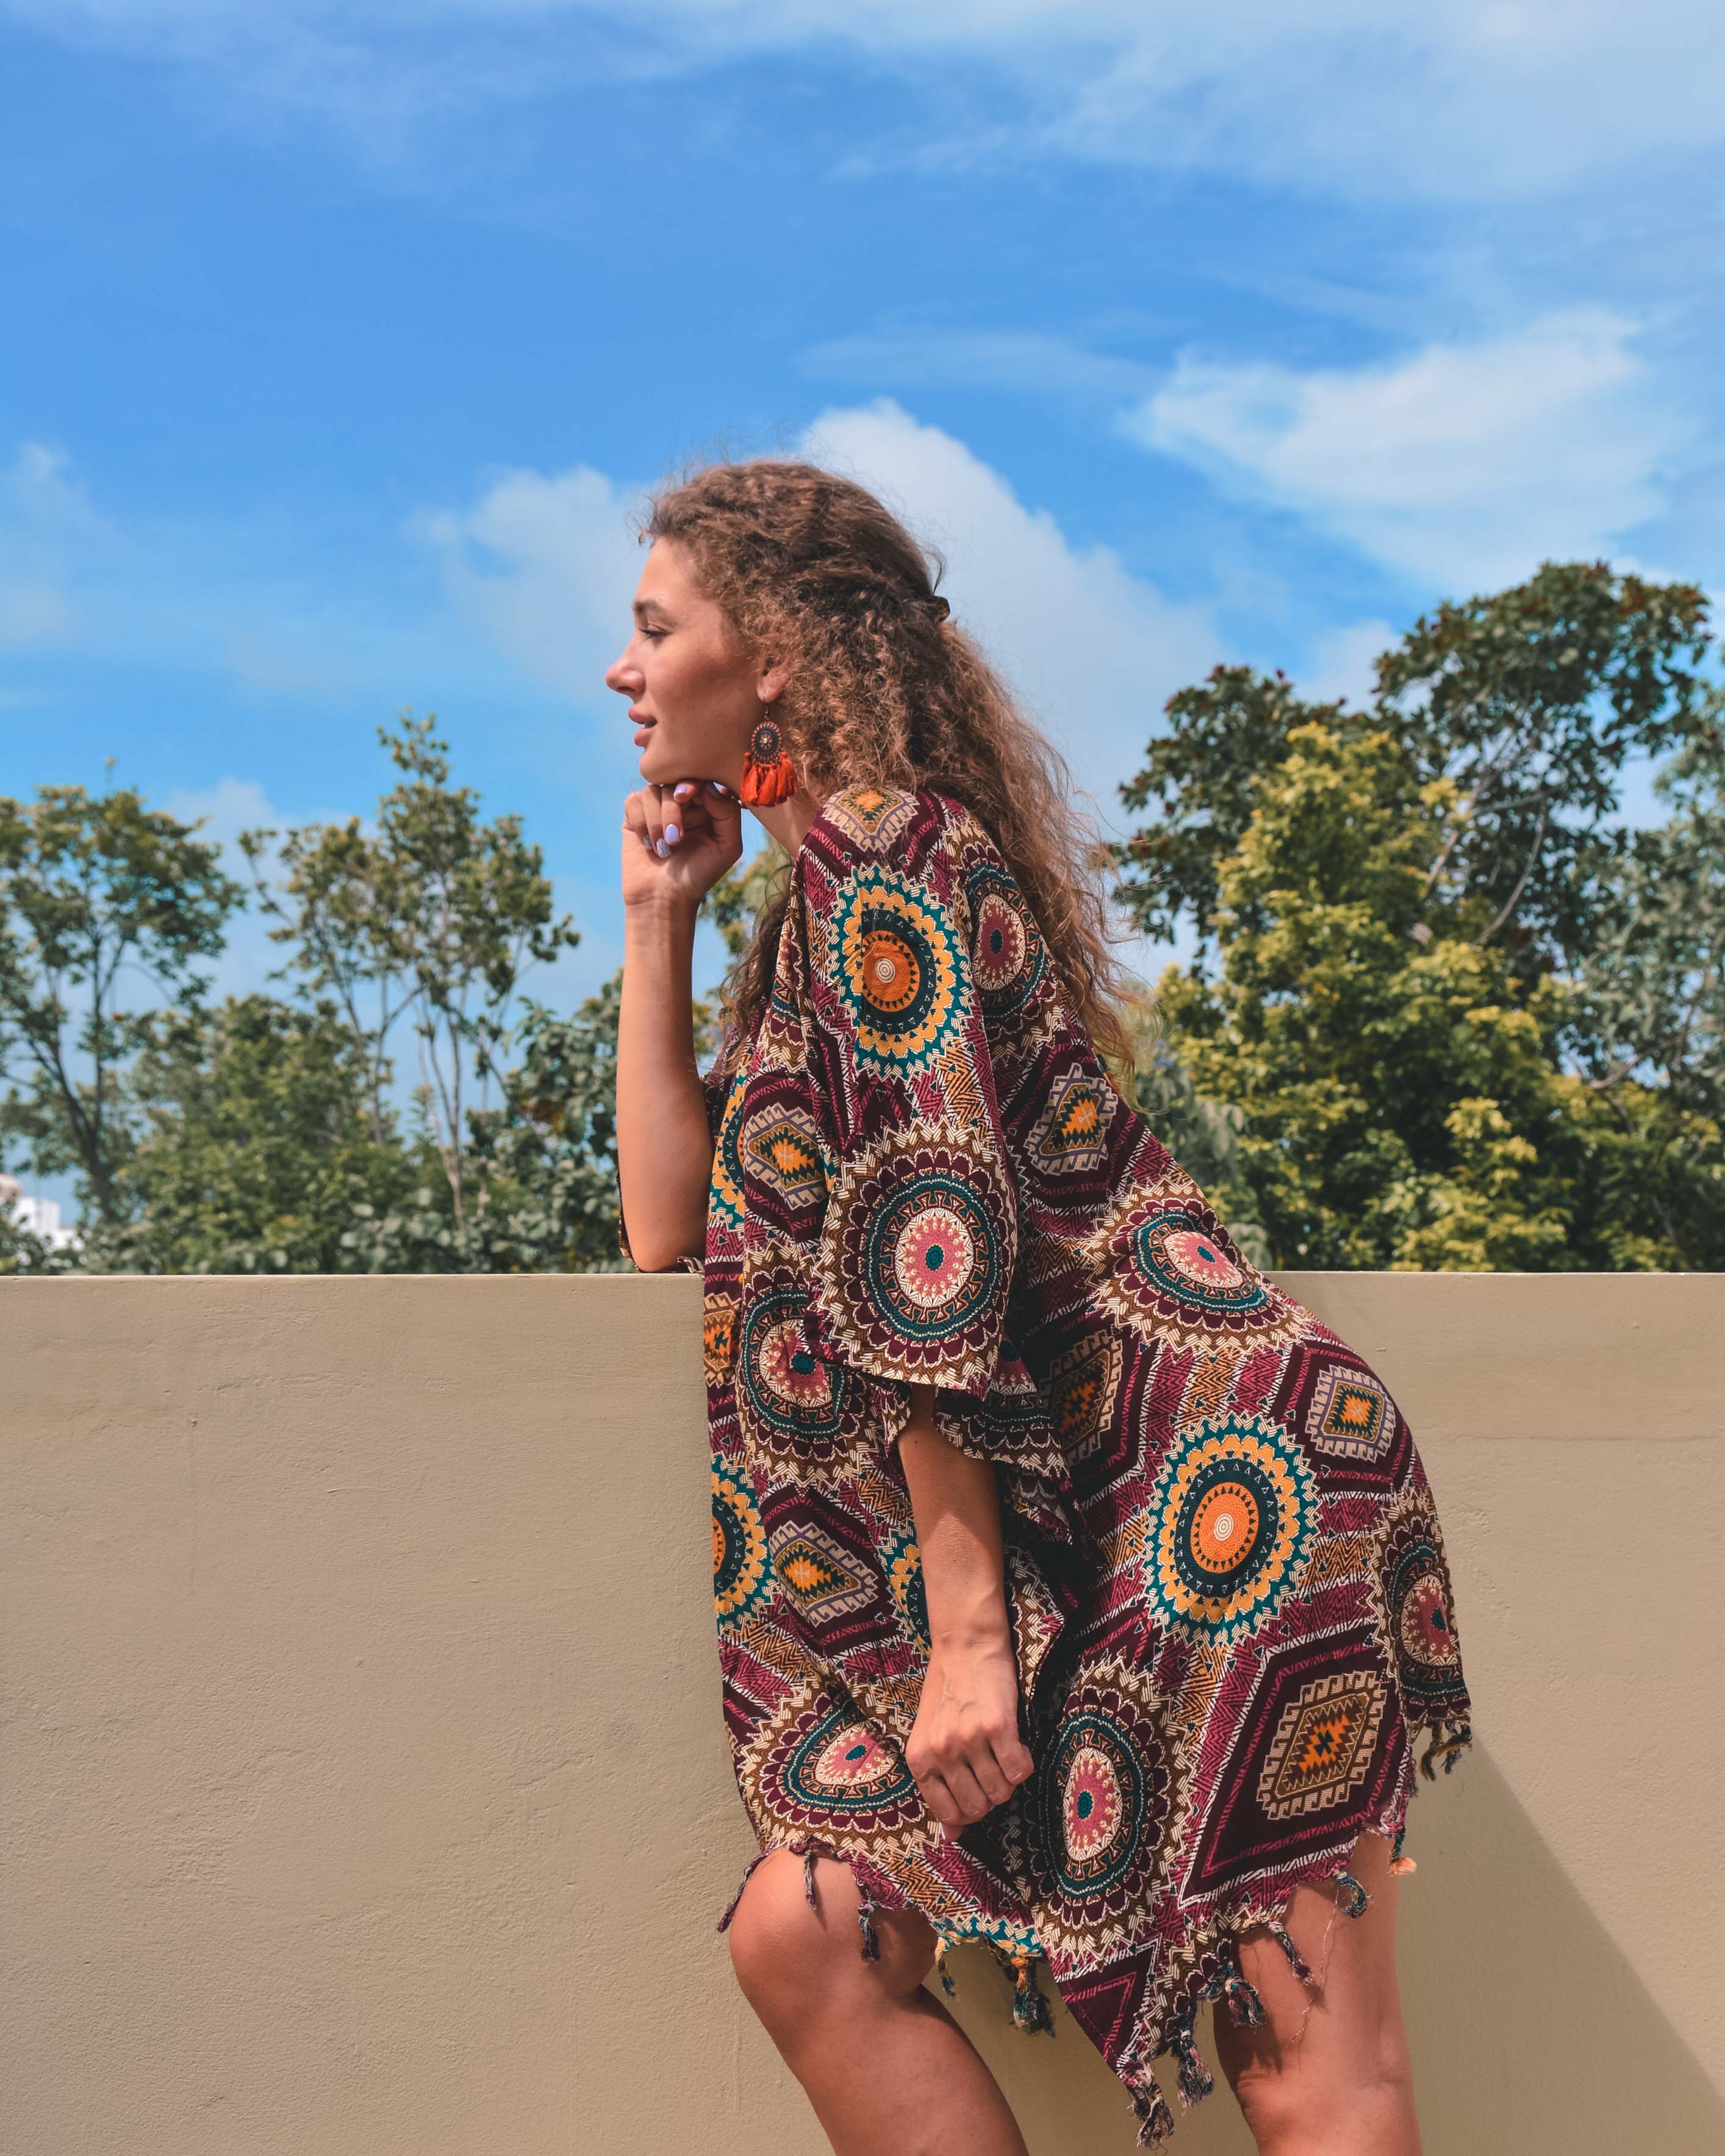 AZTEK PONCHO Elepanta Ponchos - Buy Today Elephant Pants Jewelry And Bohemian Clothes Handmade In Thailand Help To Save The Elephants FairTrade And Vegan